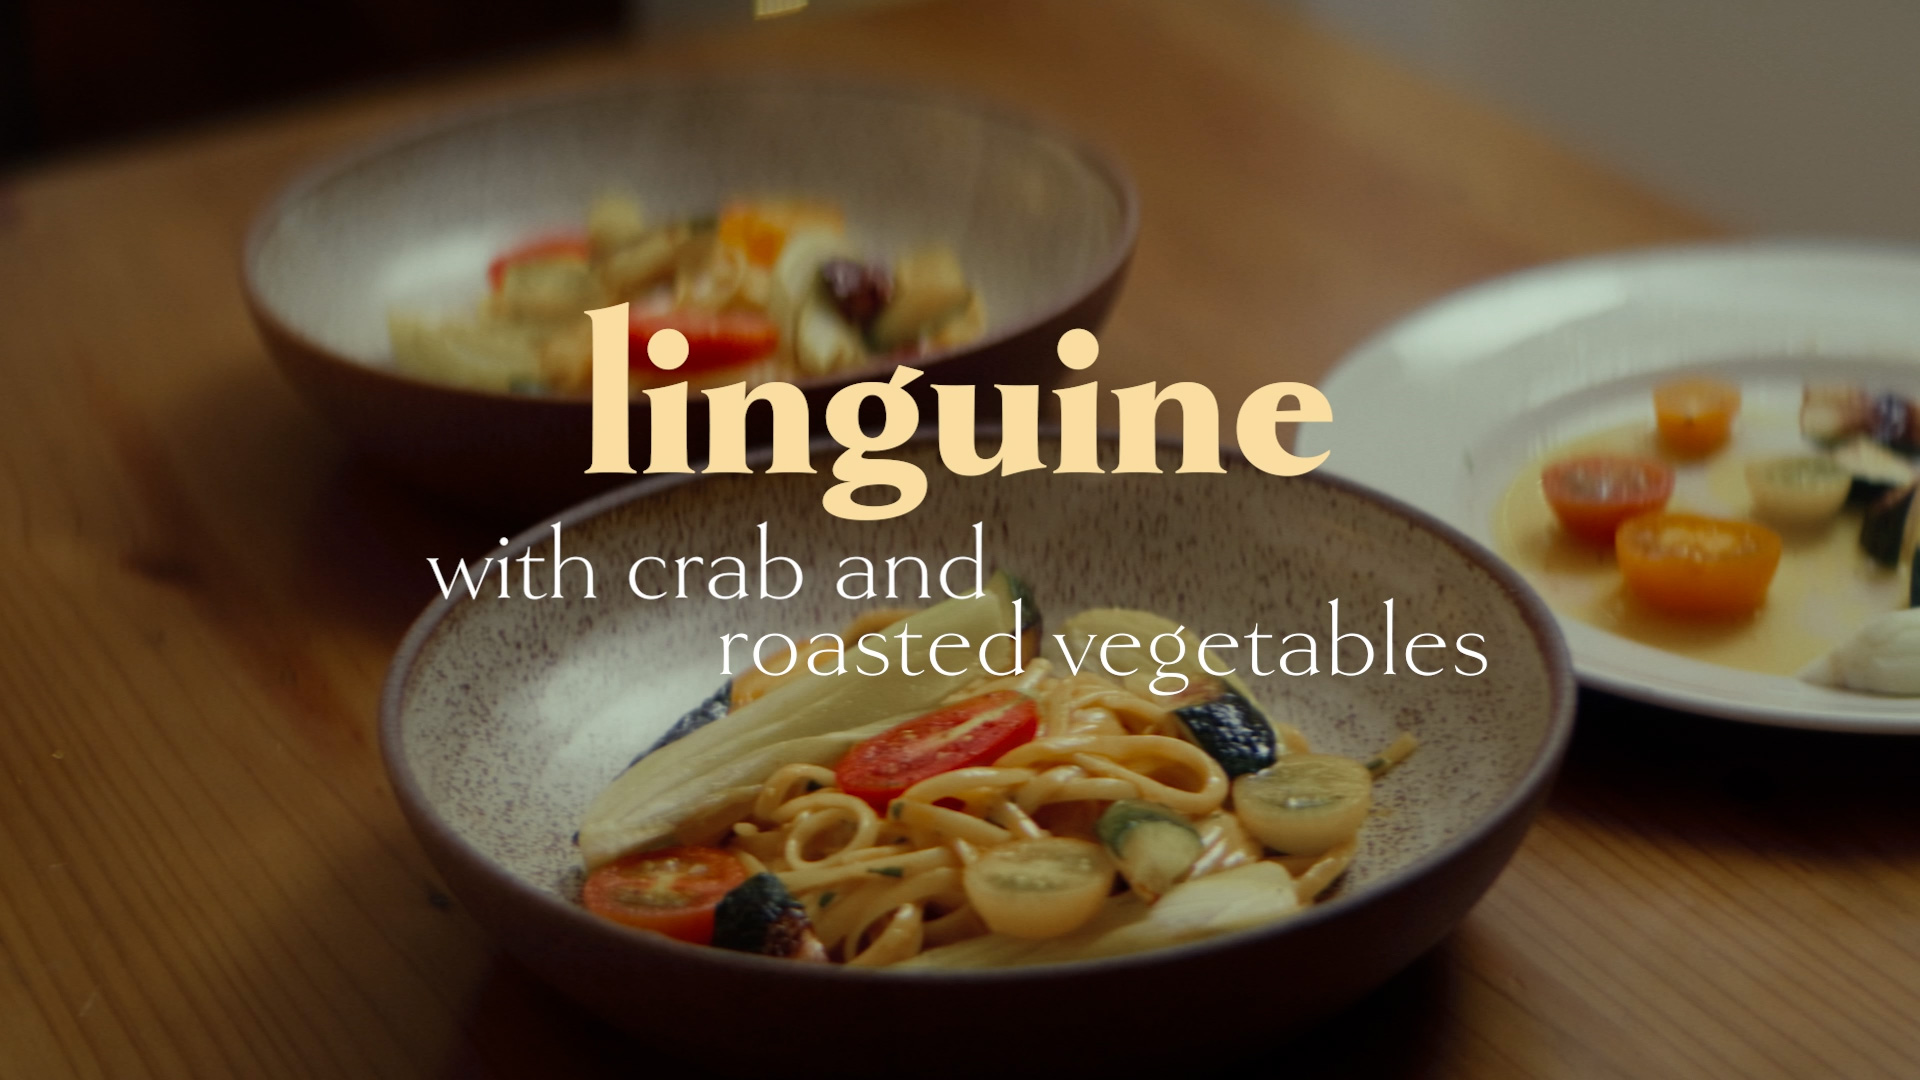 Barilla | Linguine with Crab and Roasted Vegetables